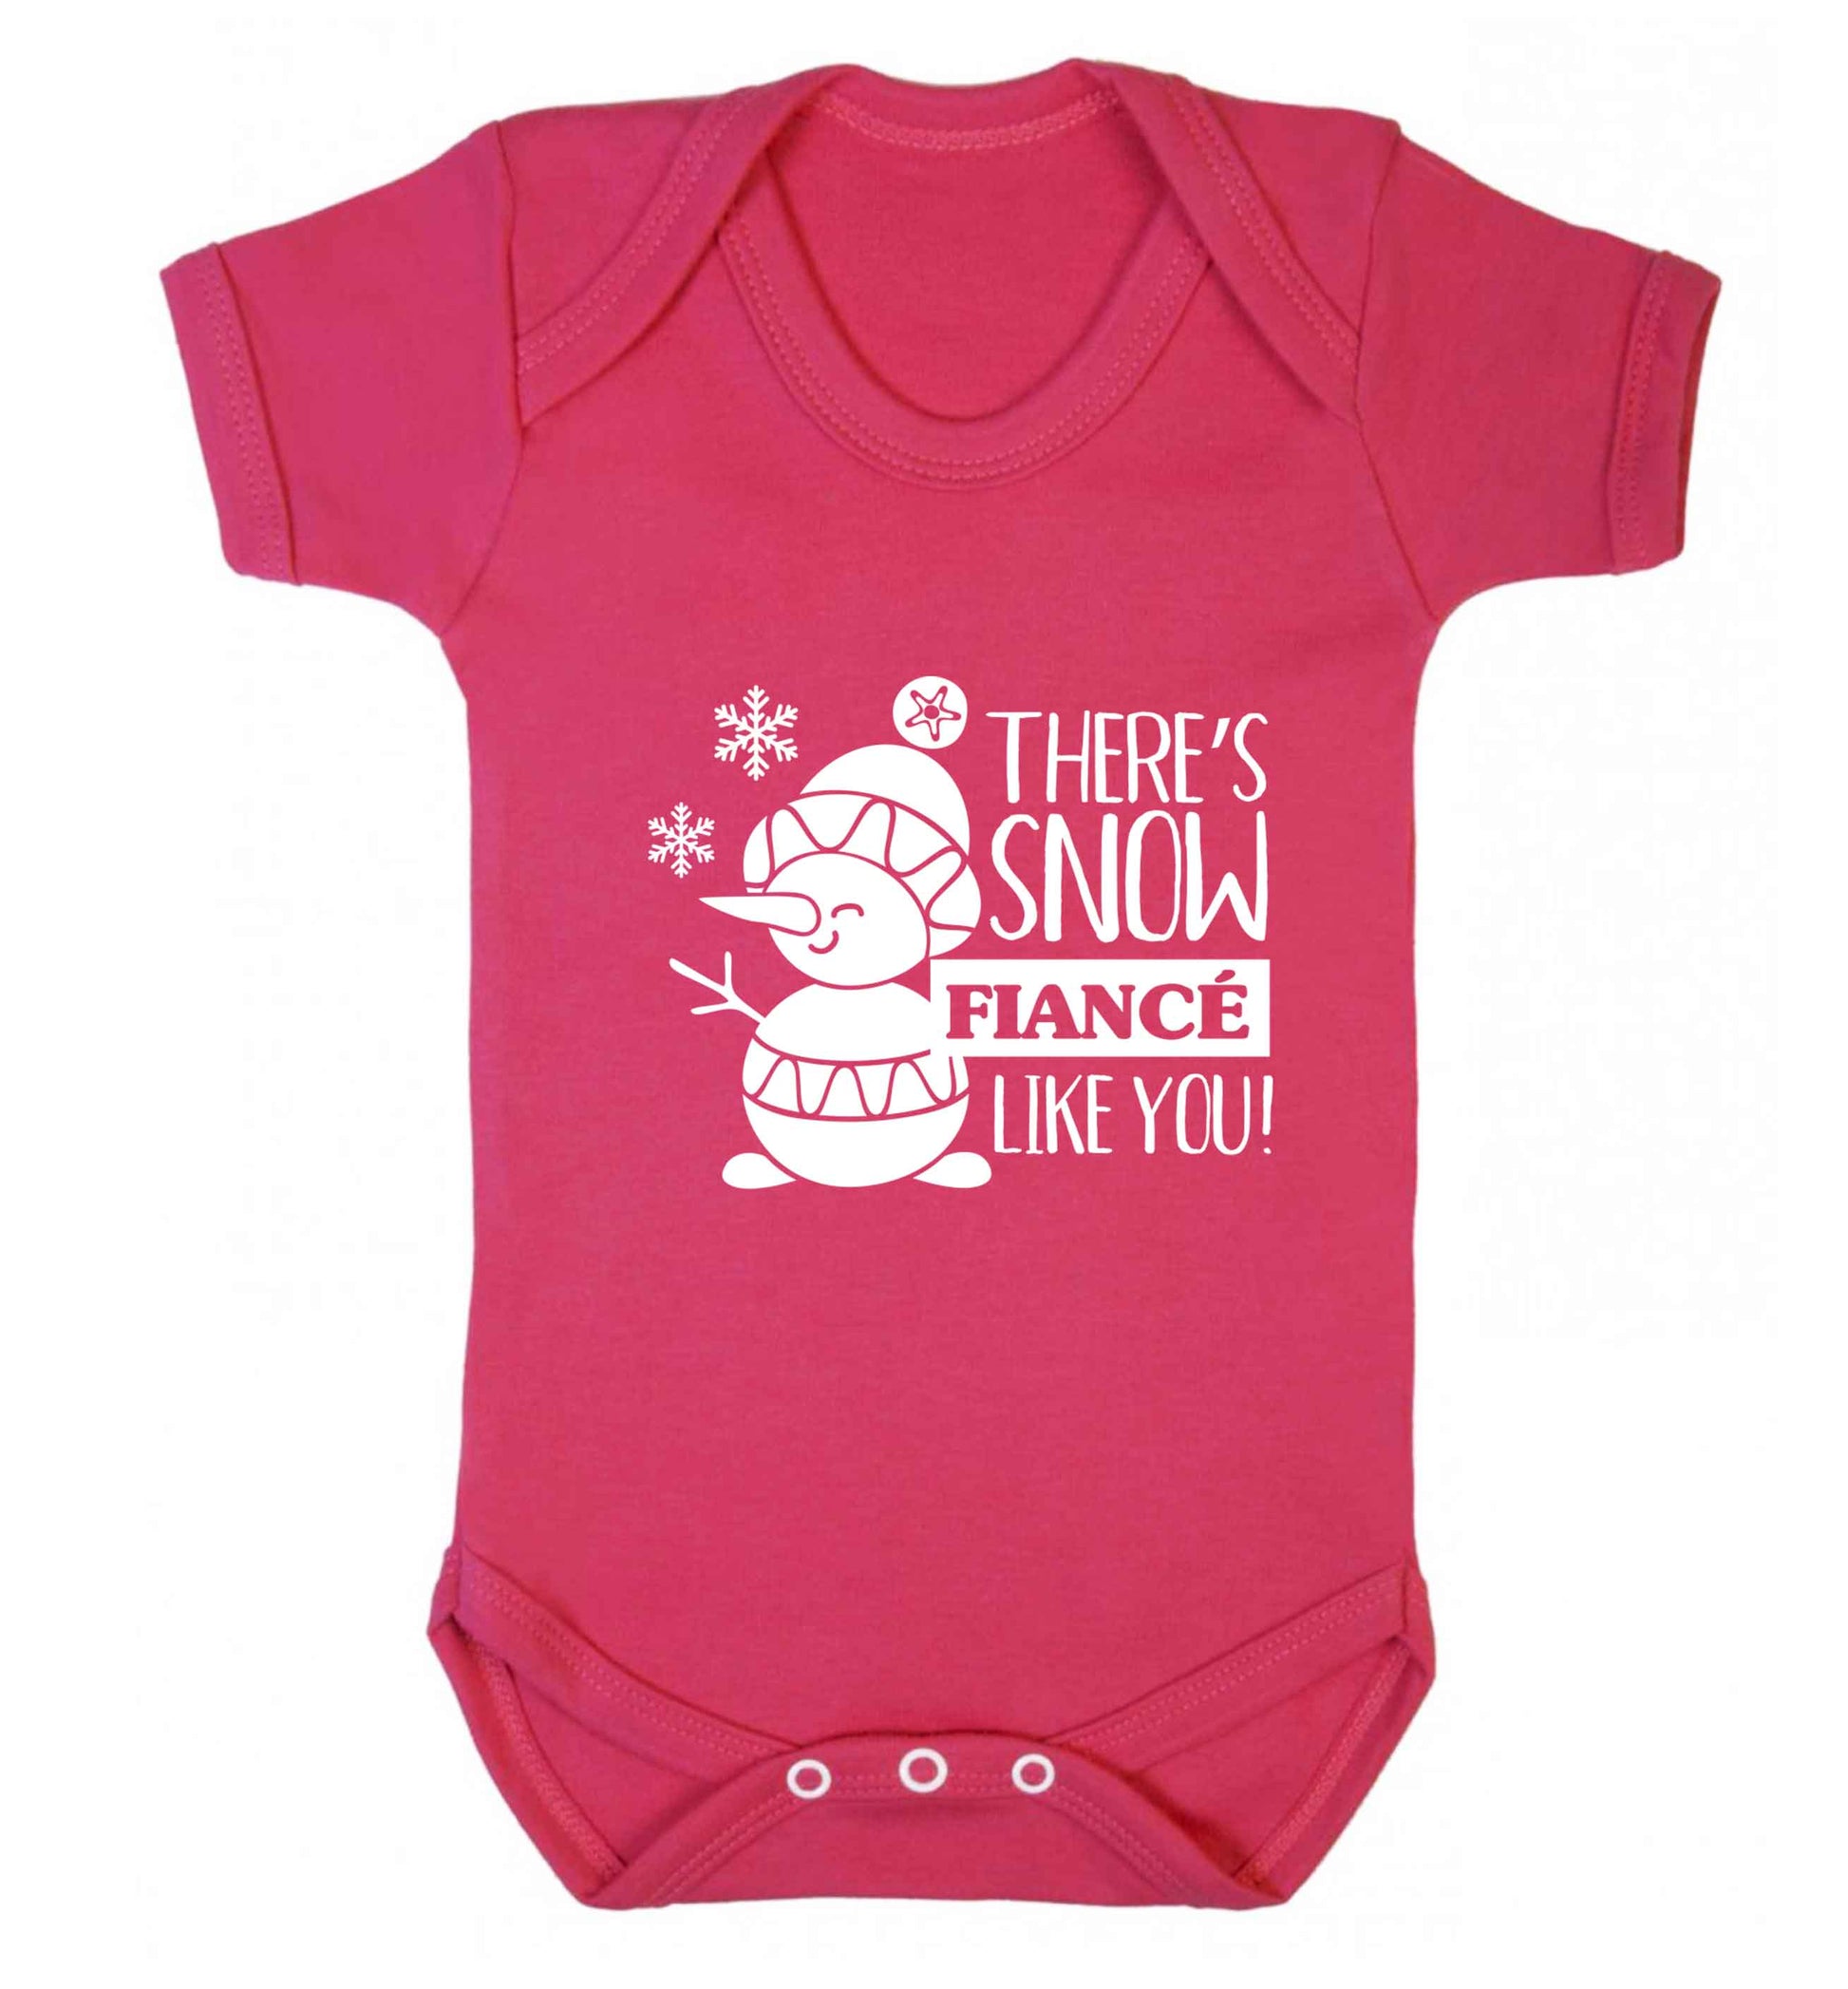 There's snow fiance like you baby vest dark pink 18-24 months